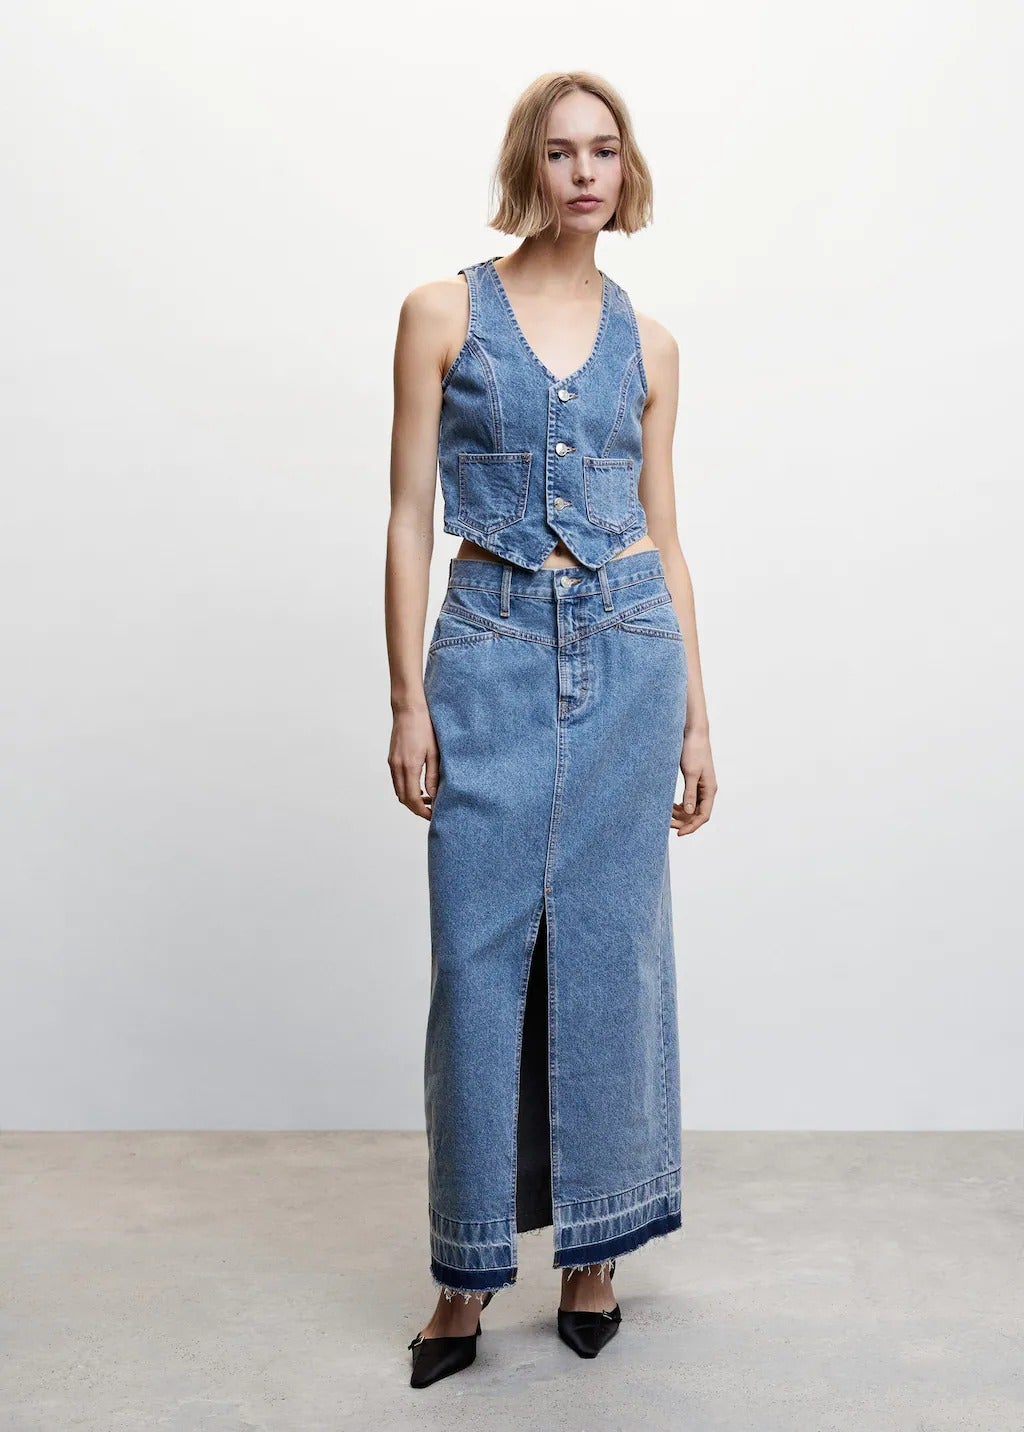 Forget The Mini – Midi & Maxi Skirts Are Our New Denim Obsession